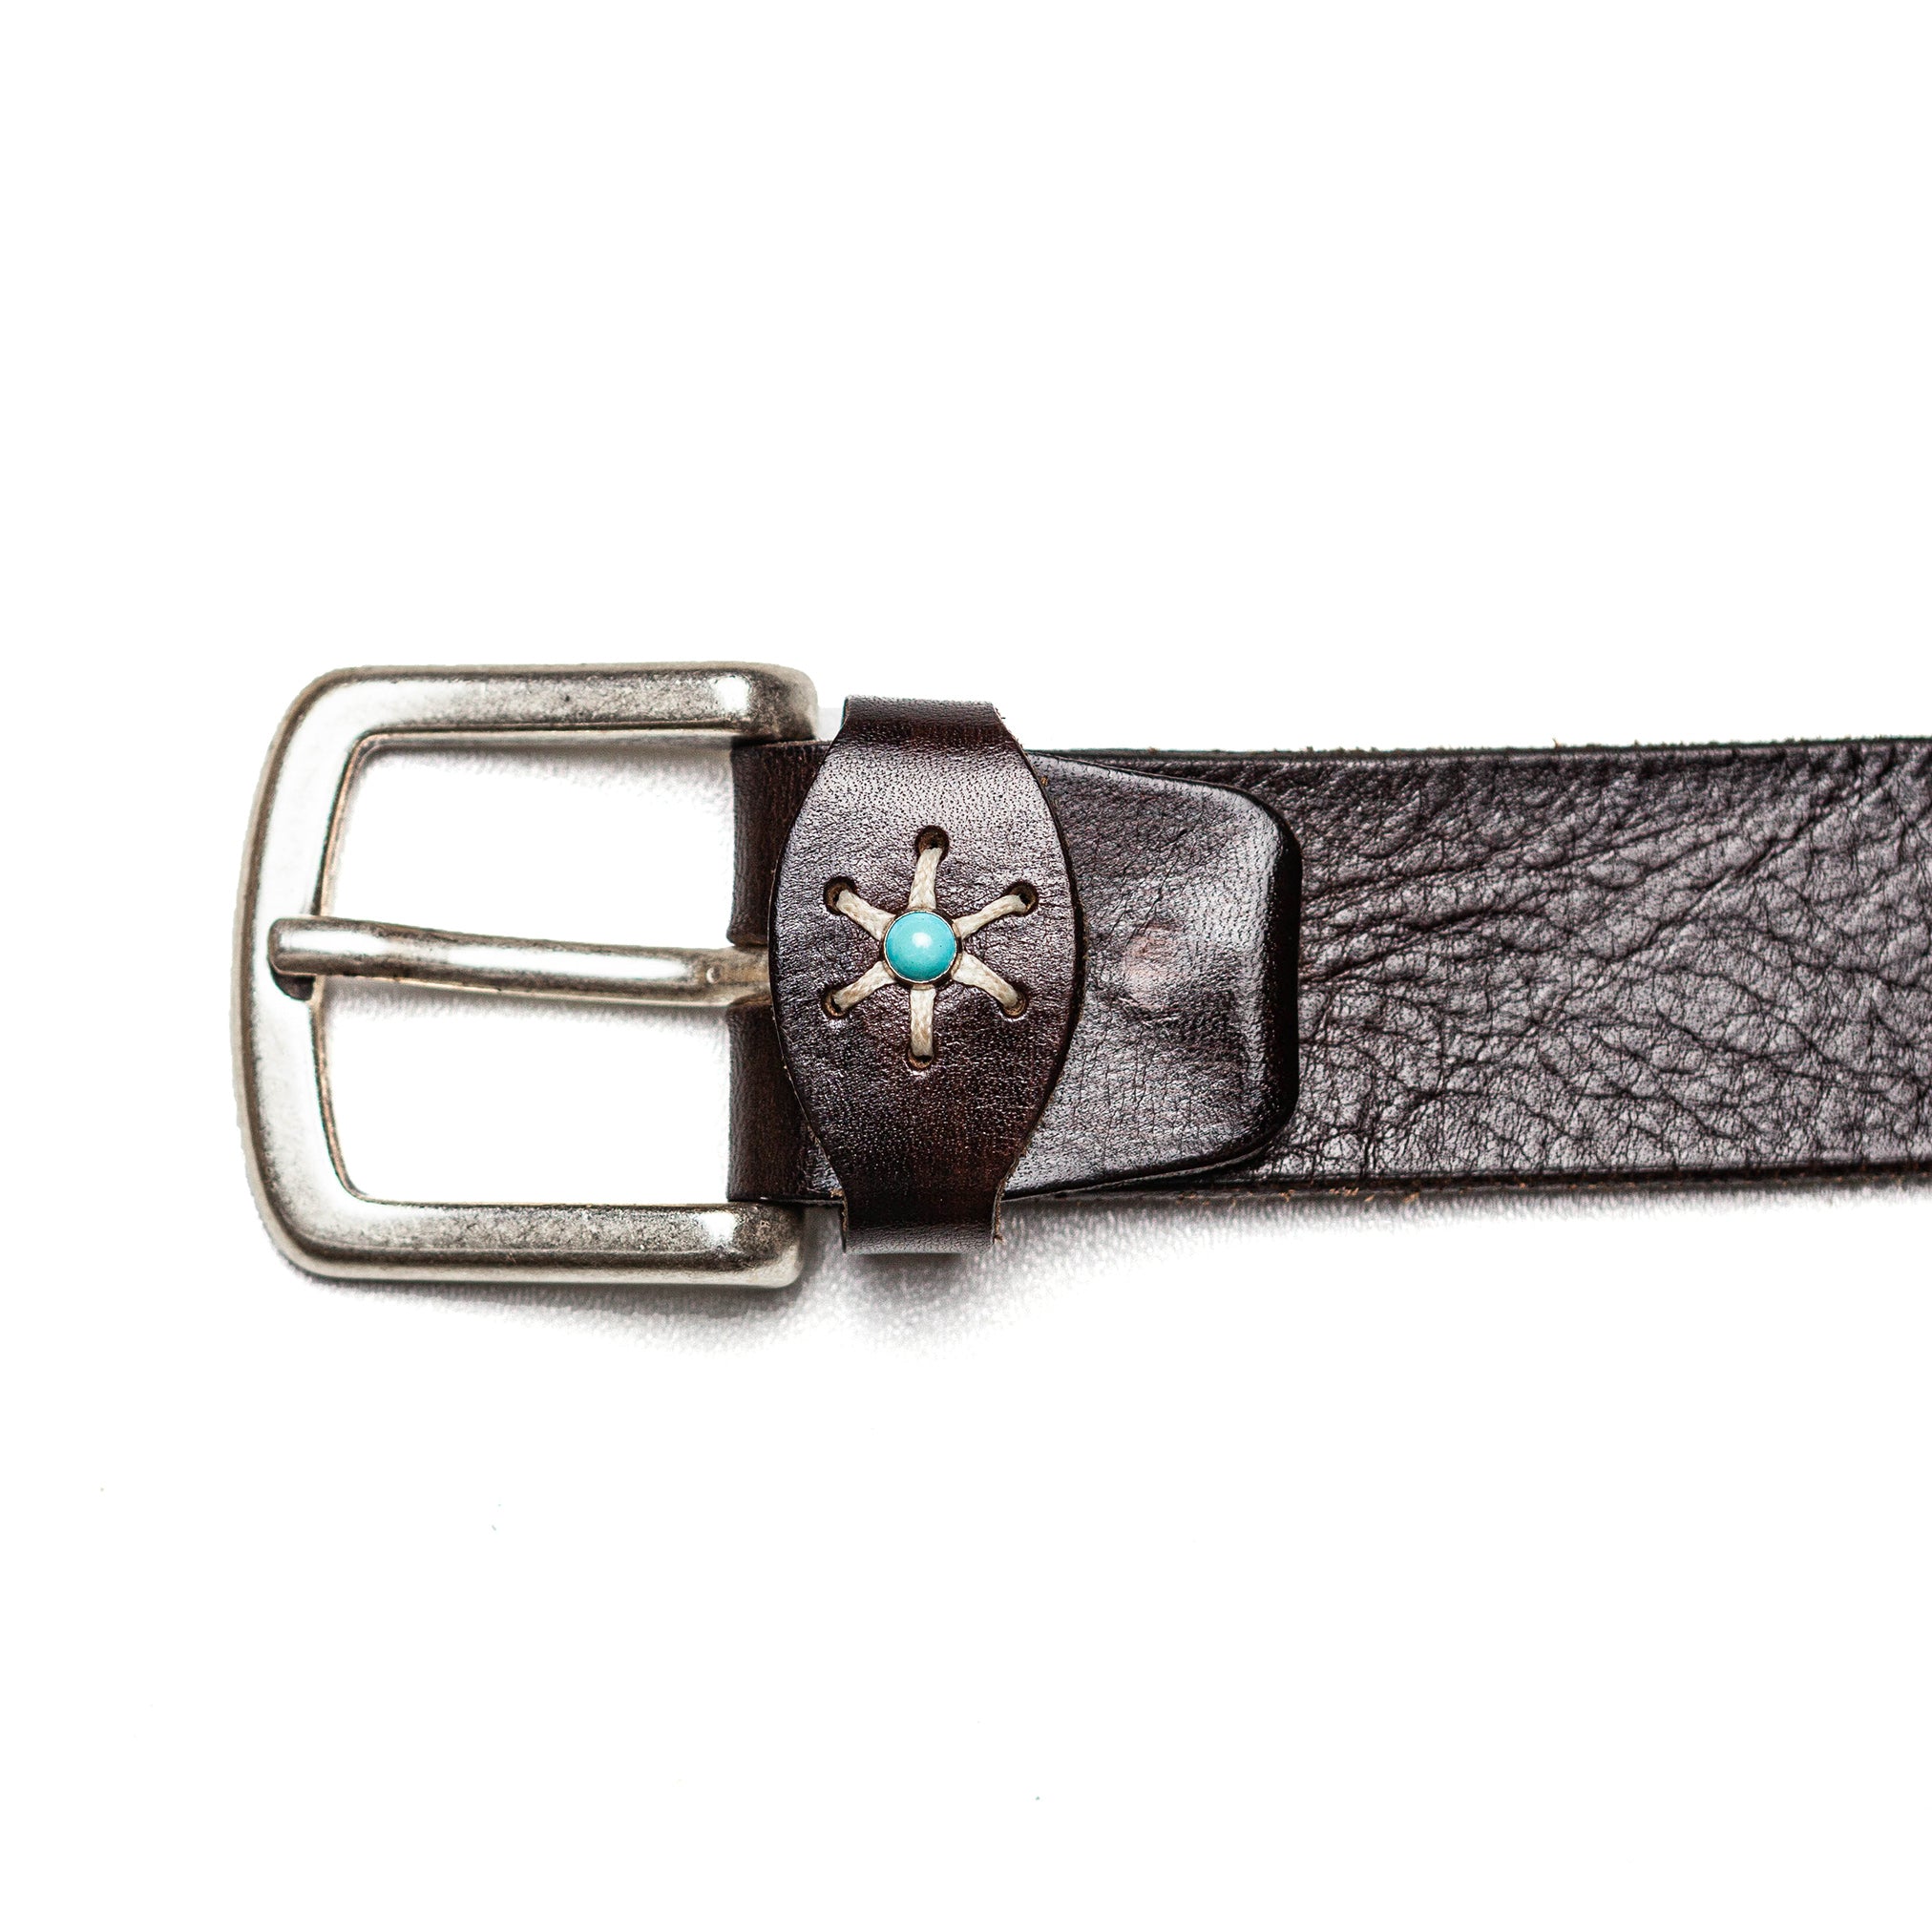 The Leather Links Belt